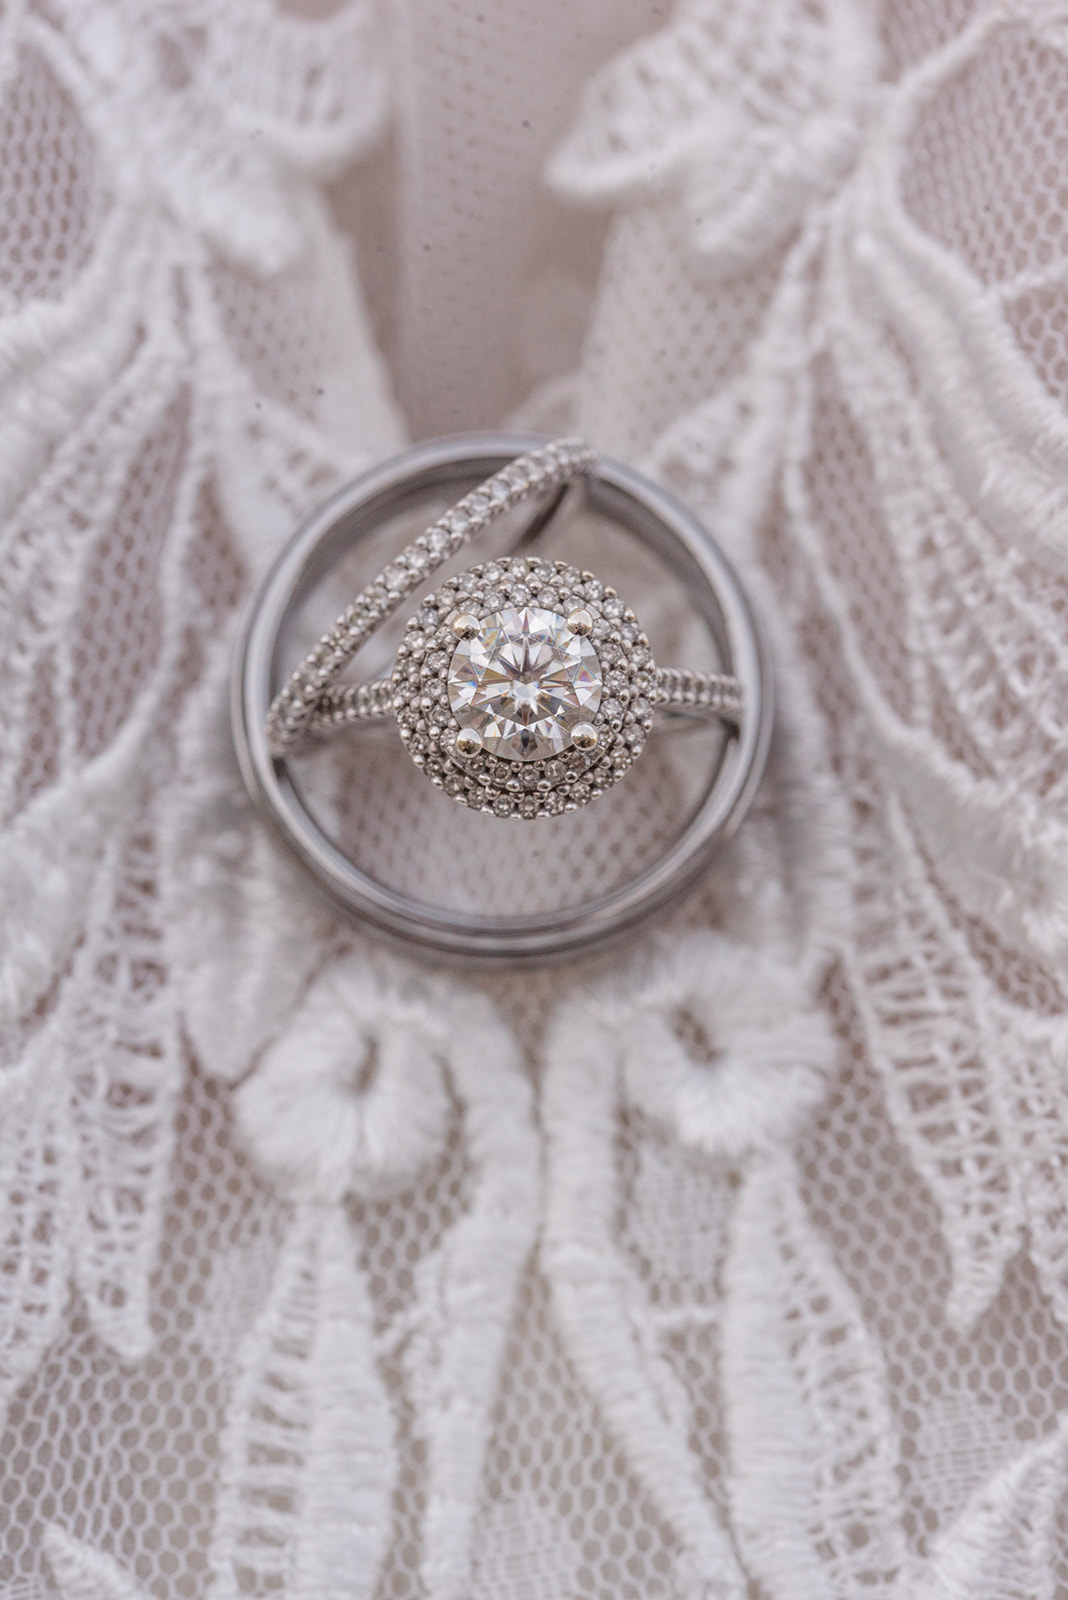 Wedding rings sit on top of wedding gown embroidery details